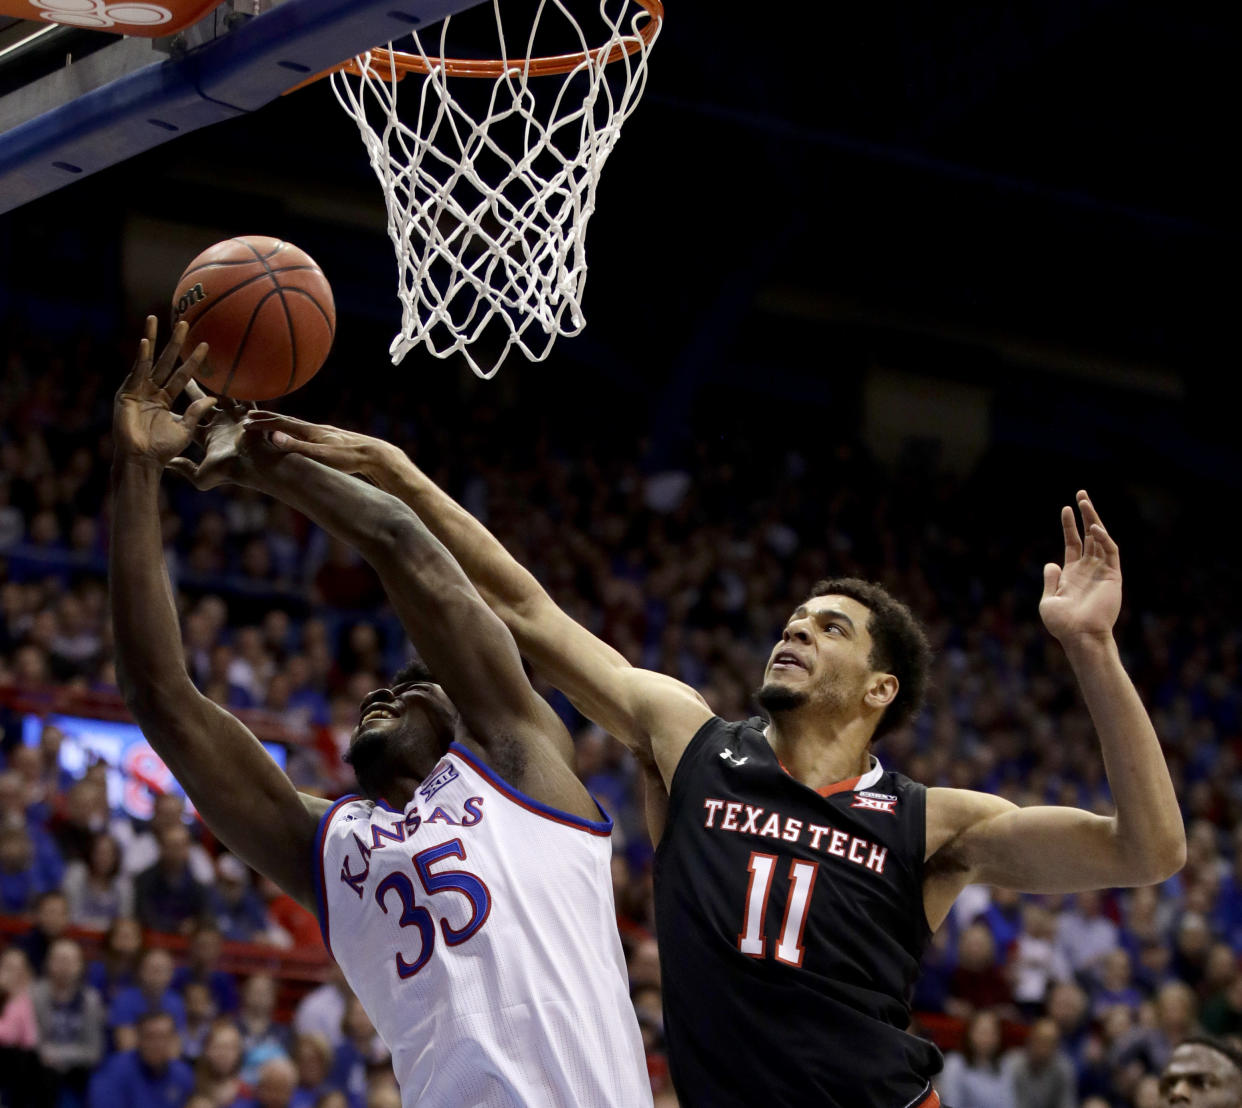 Kansas’ Udoka Azubuike (35) is fouled by Texas Tech’s Zach Smith (11) as he shoots during the first half of an NCAA college basketball game Tuesday, Jan. 2, 2018, in Lawrence, Kan. (AP Photo/Charlie Riedel)